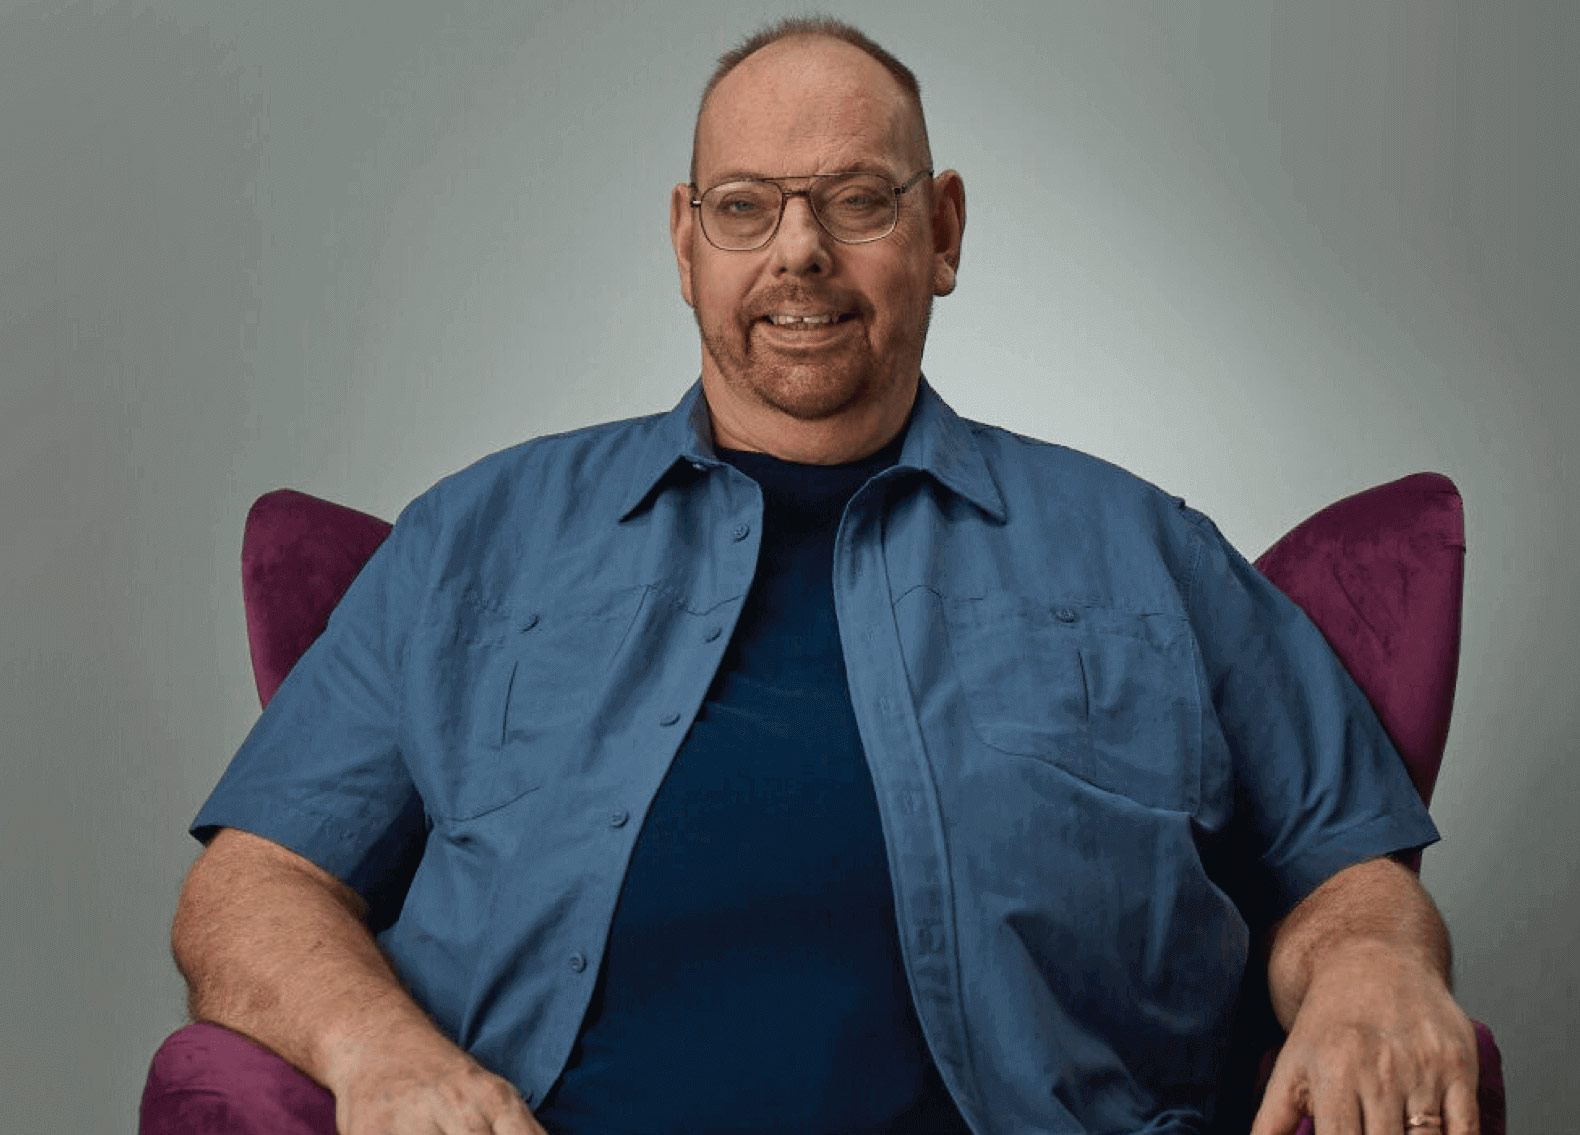 Image of a man in a blue shirt sitting in a purple chair.